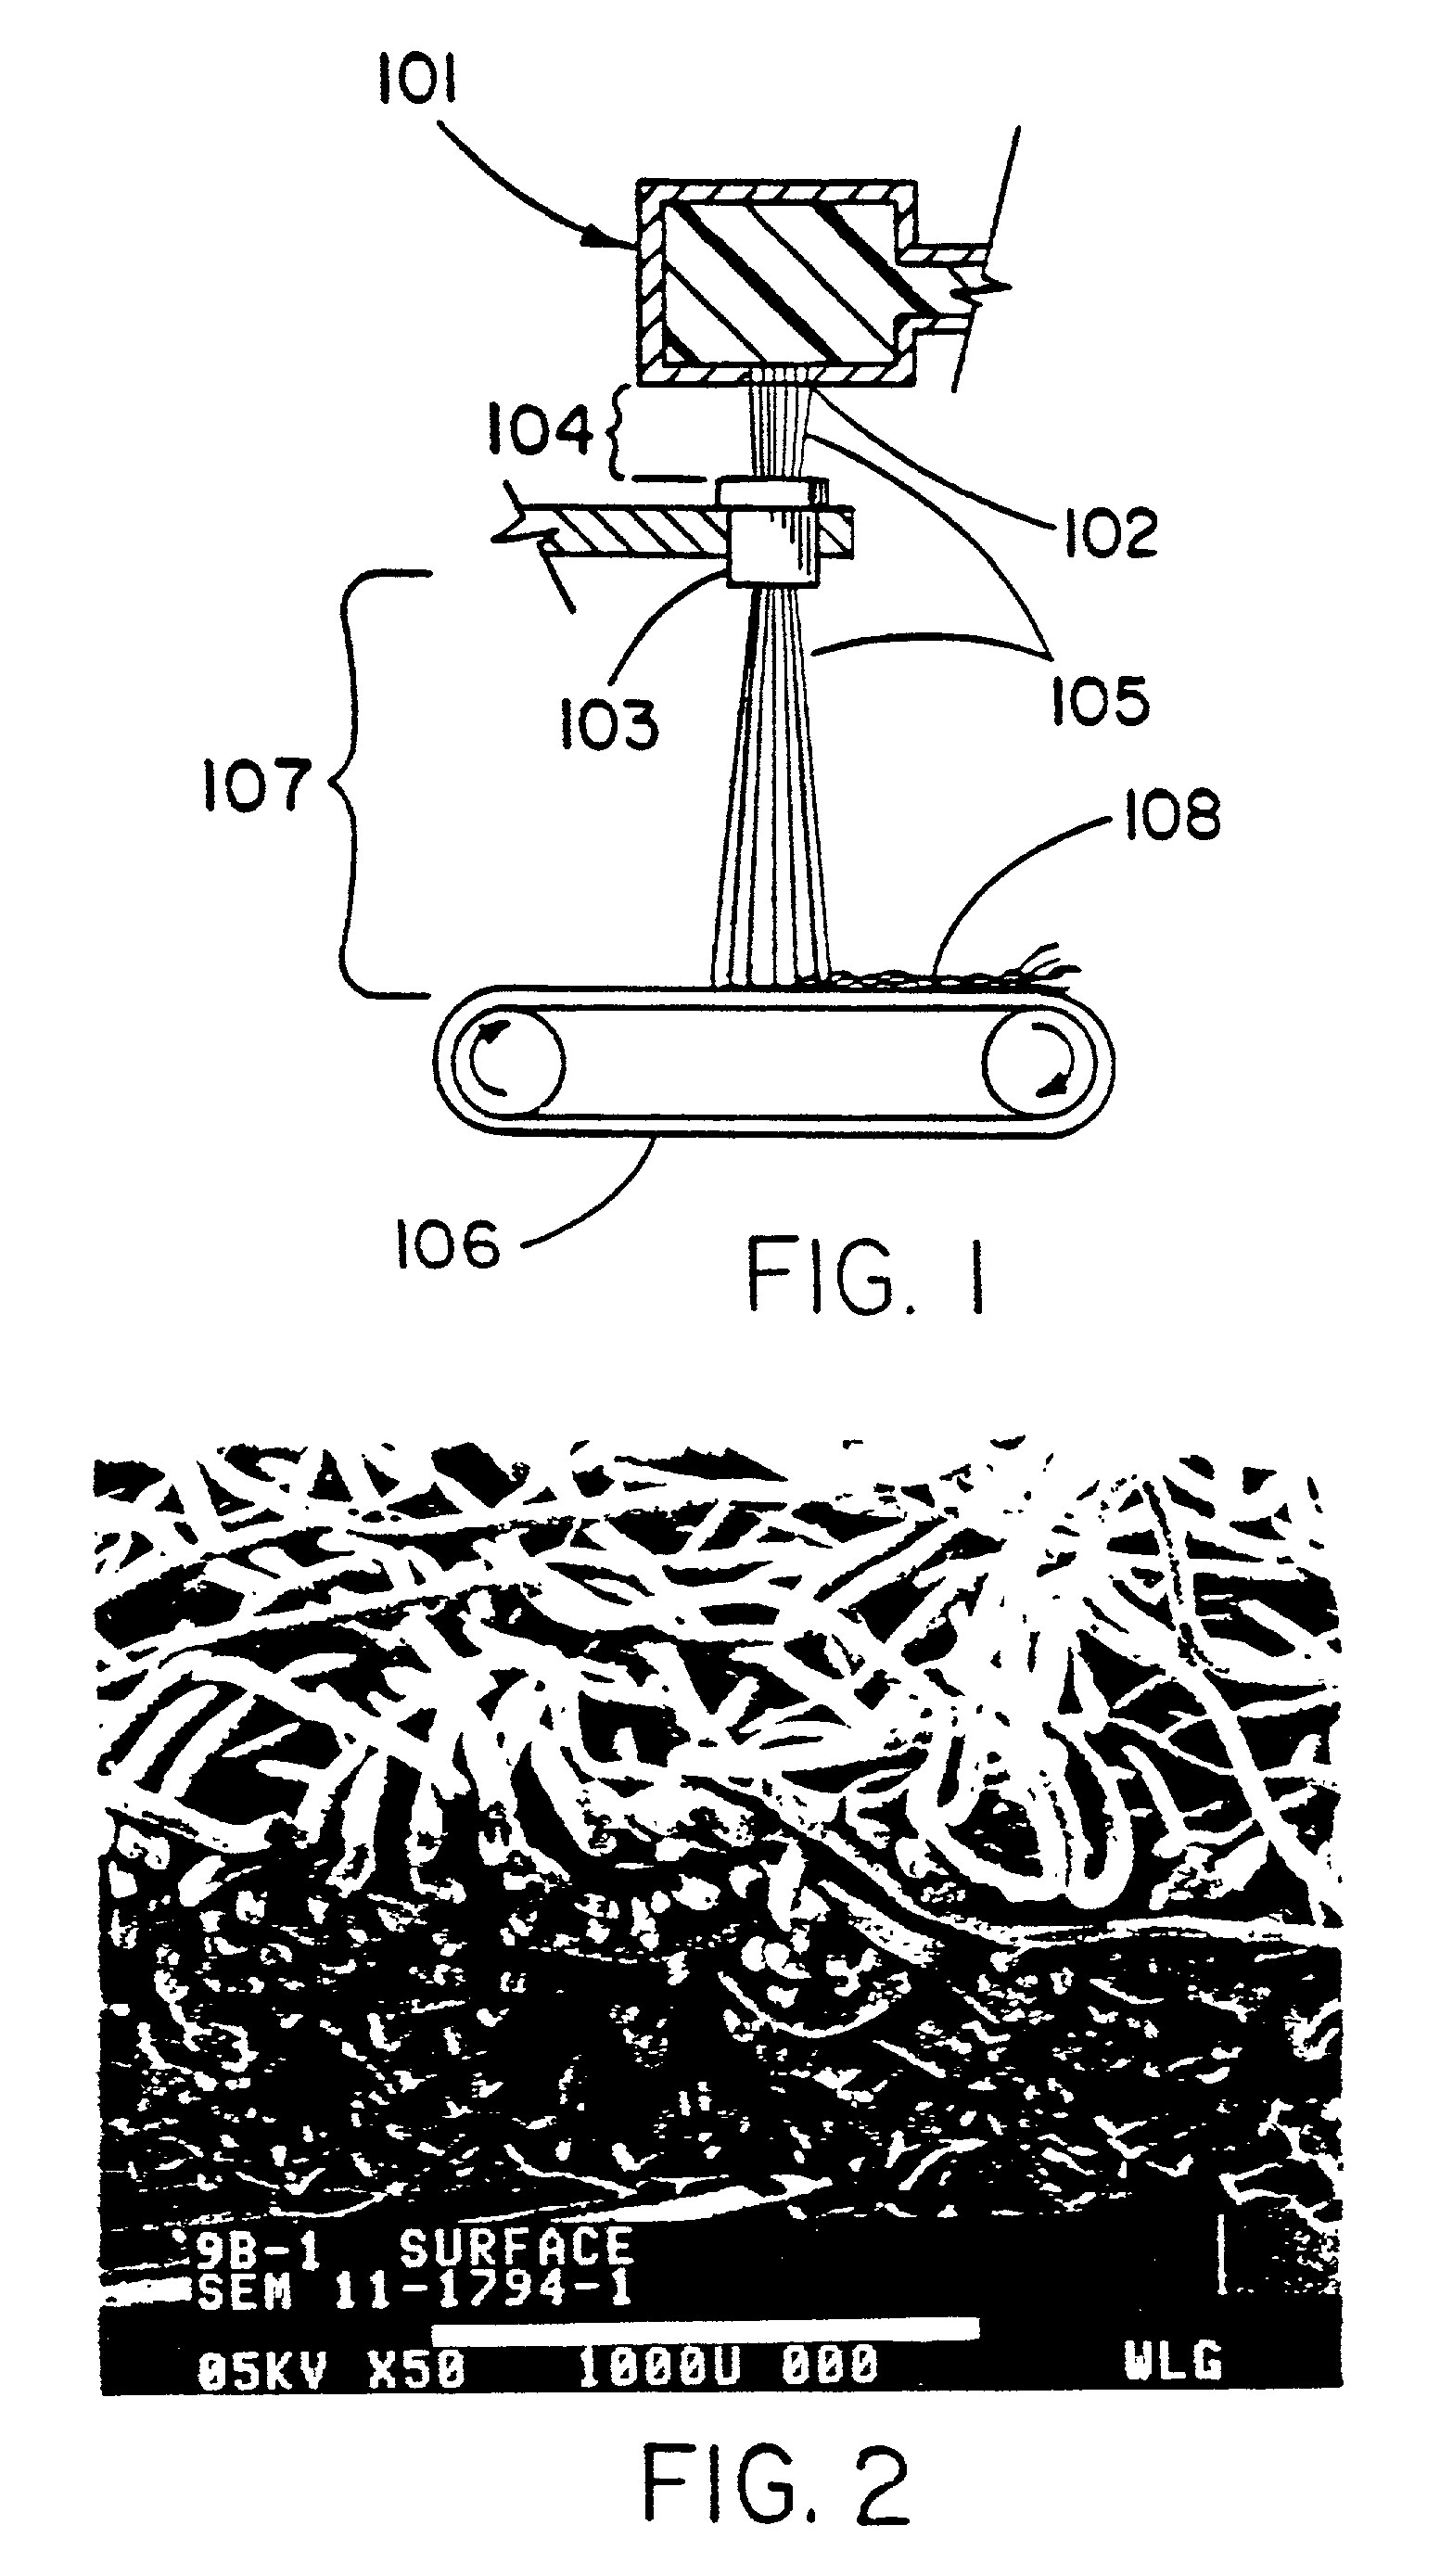 Self-cohering, continuous filament non-woven webs